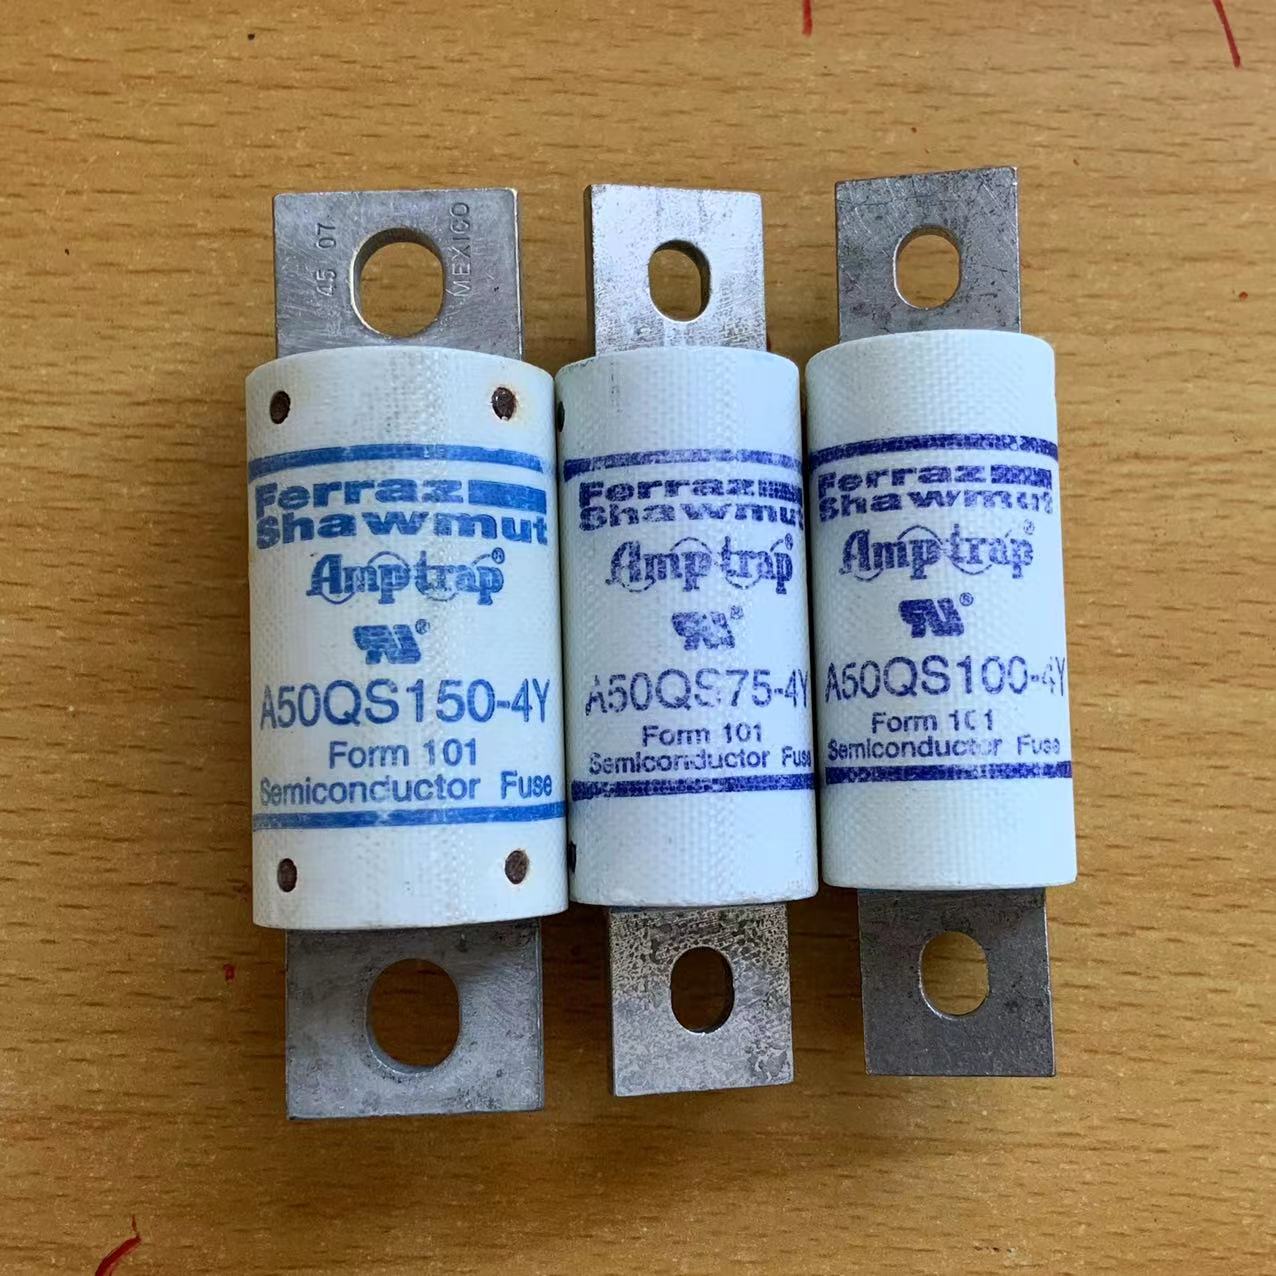 A50QS75-4Y A50QS100-4Y A50QS150-4Y A70QS175-4 ferraz shawmut fuse used and tested original